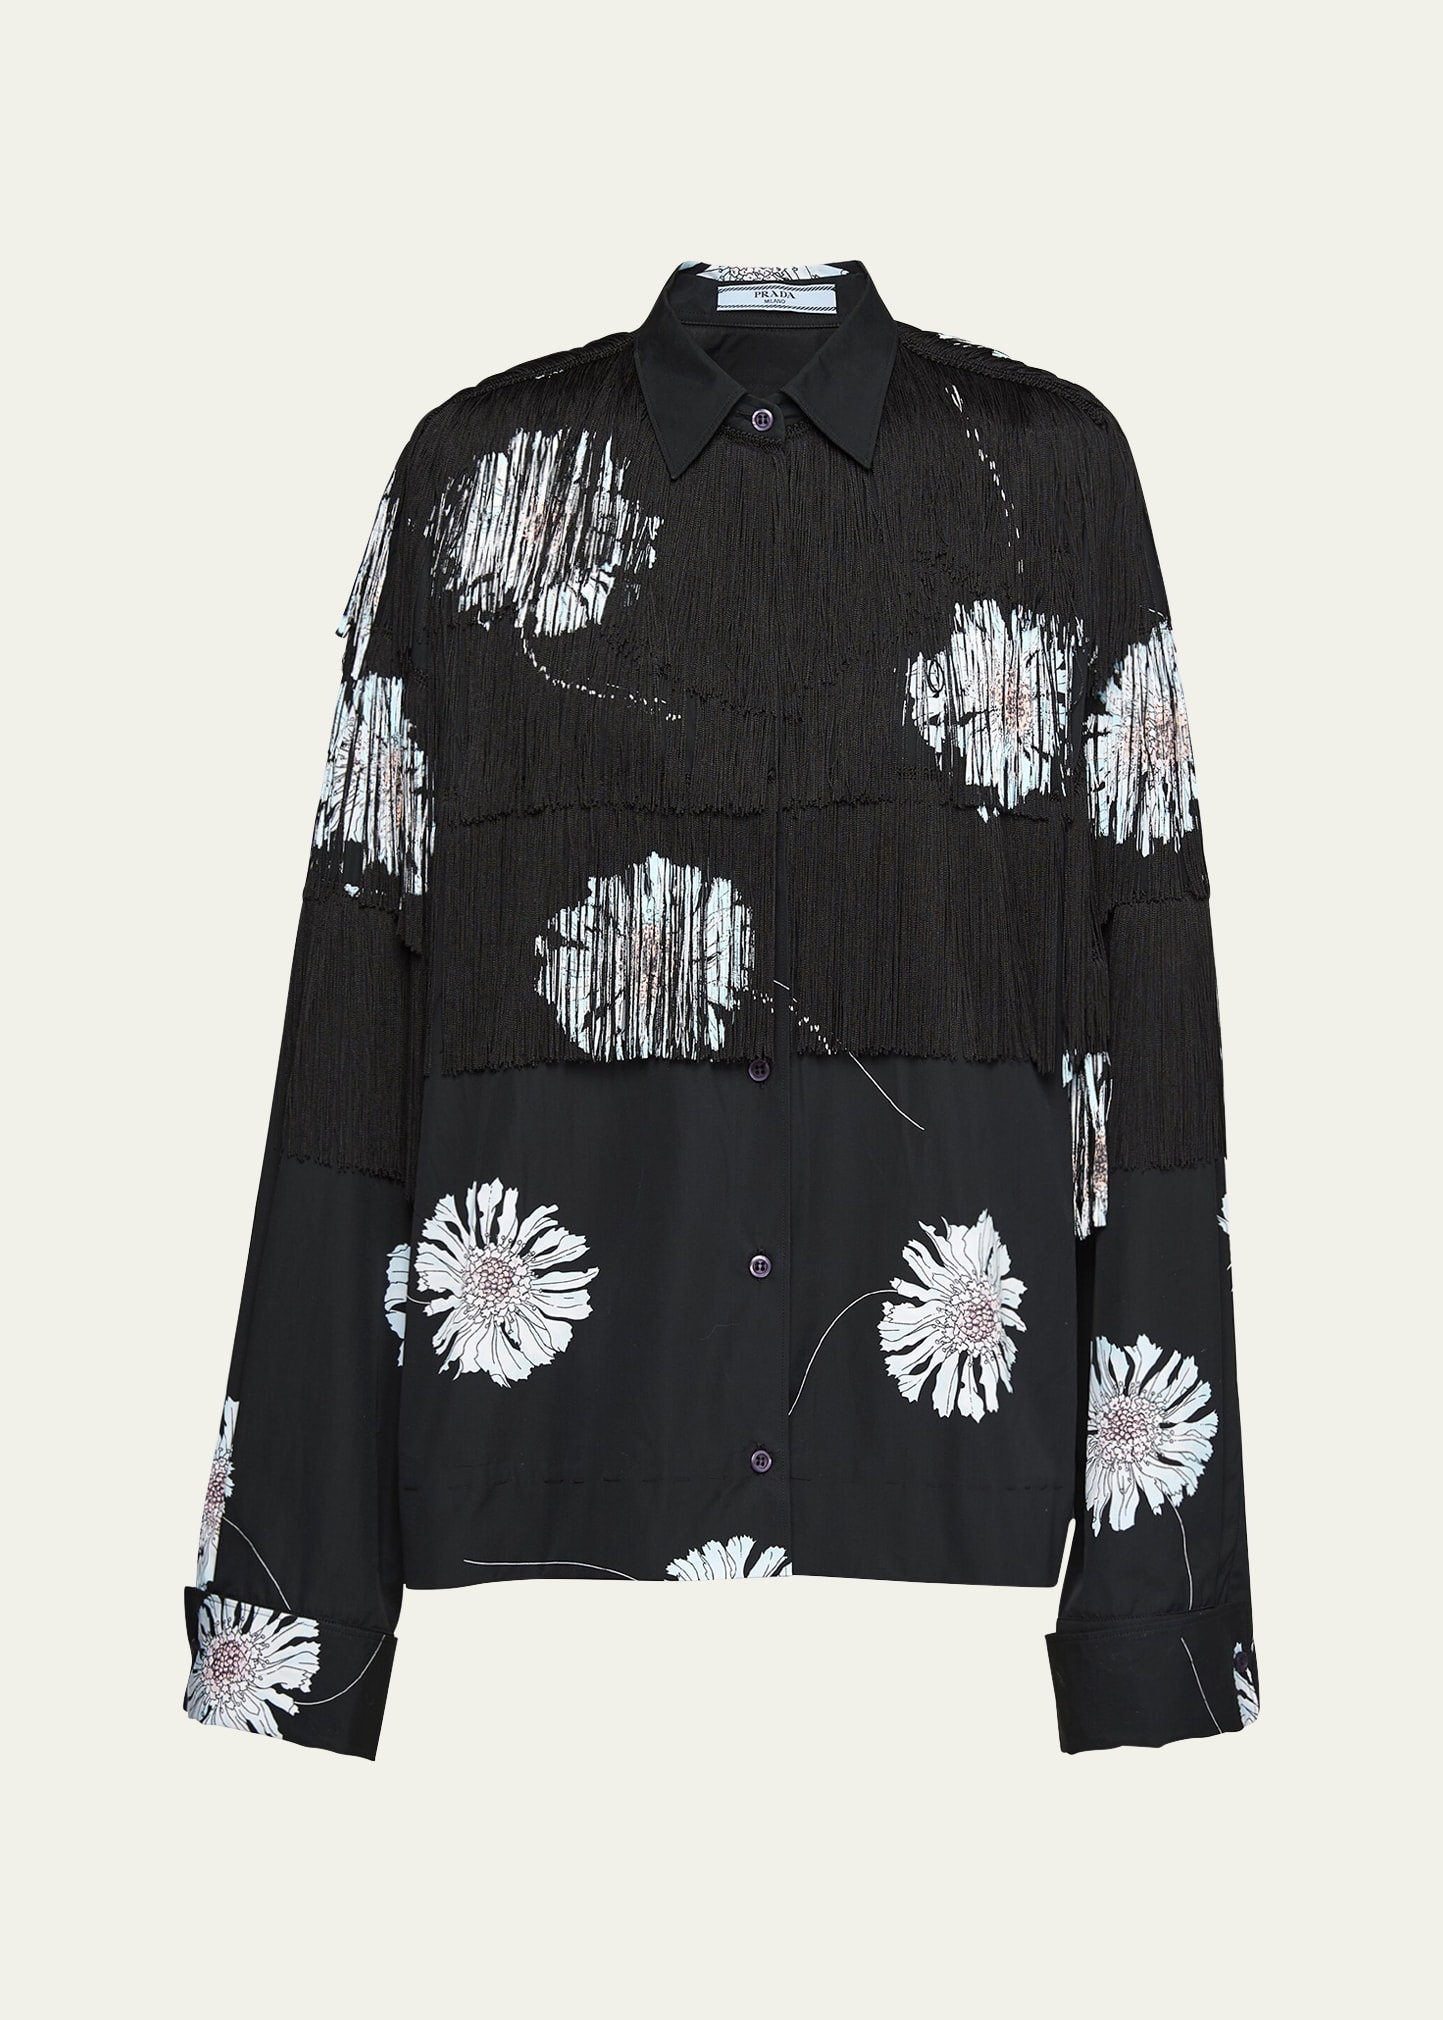 Prada Gerbera And Fringe Button-front Shirt In F0m10 Astro